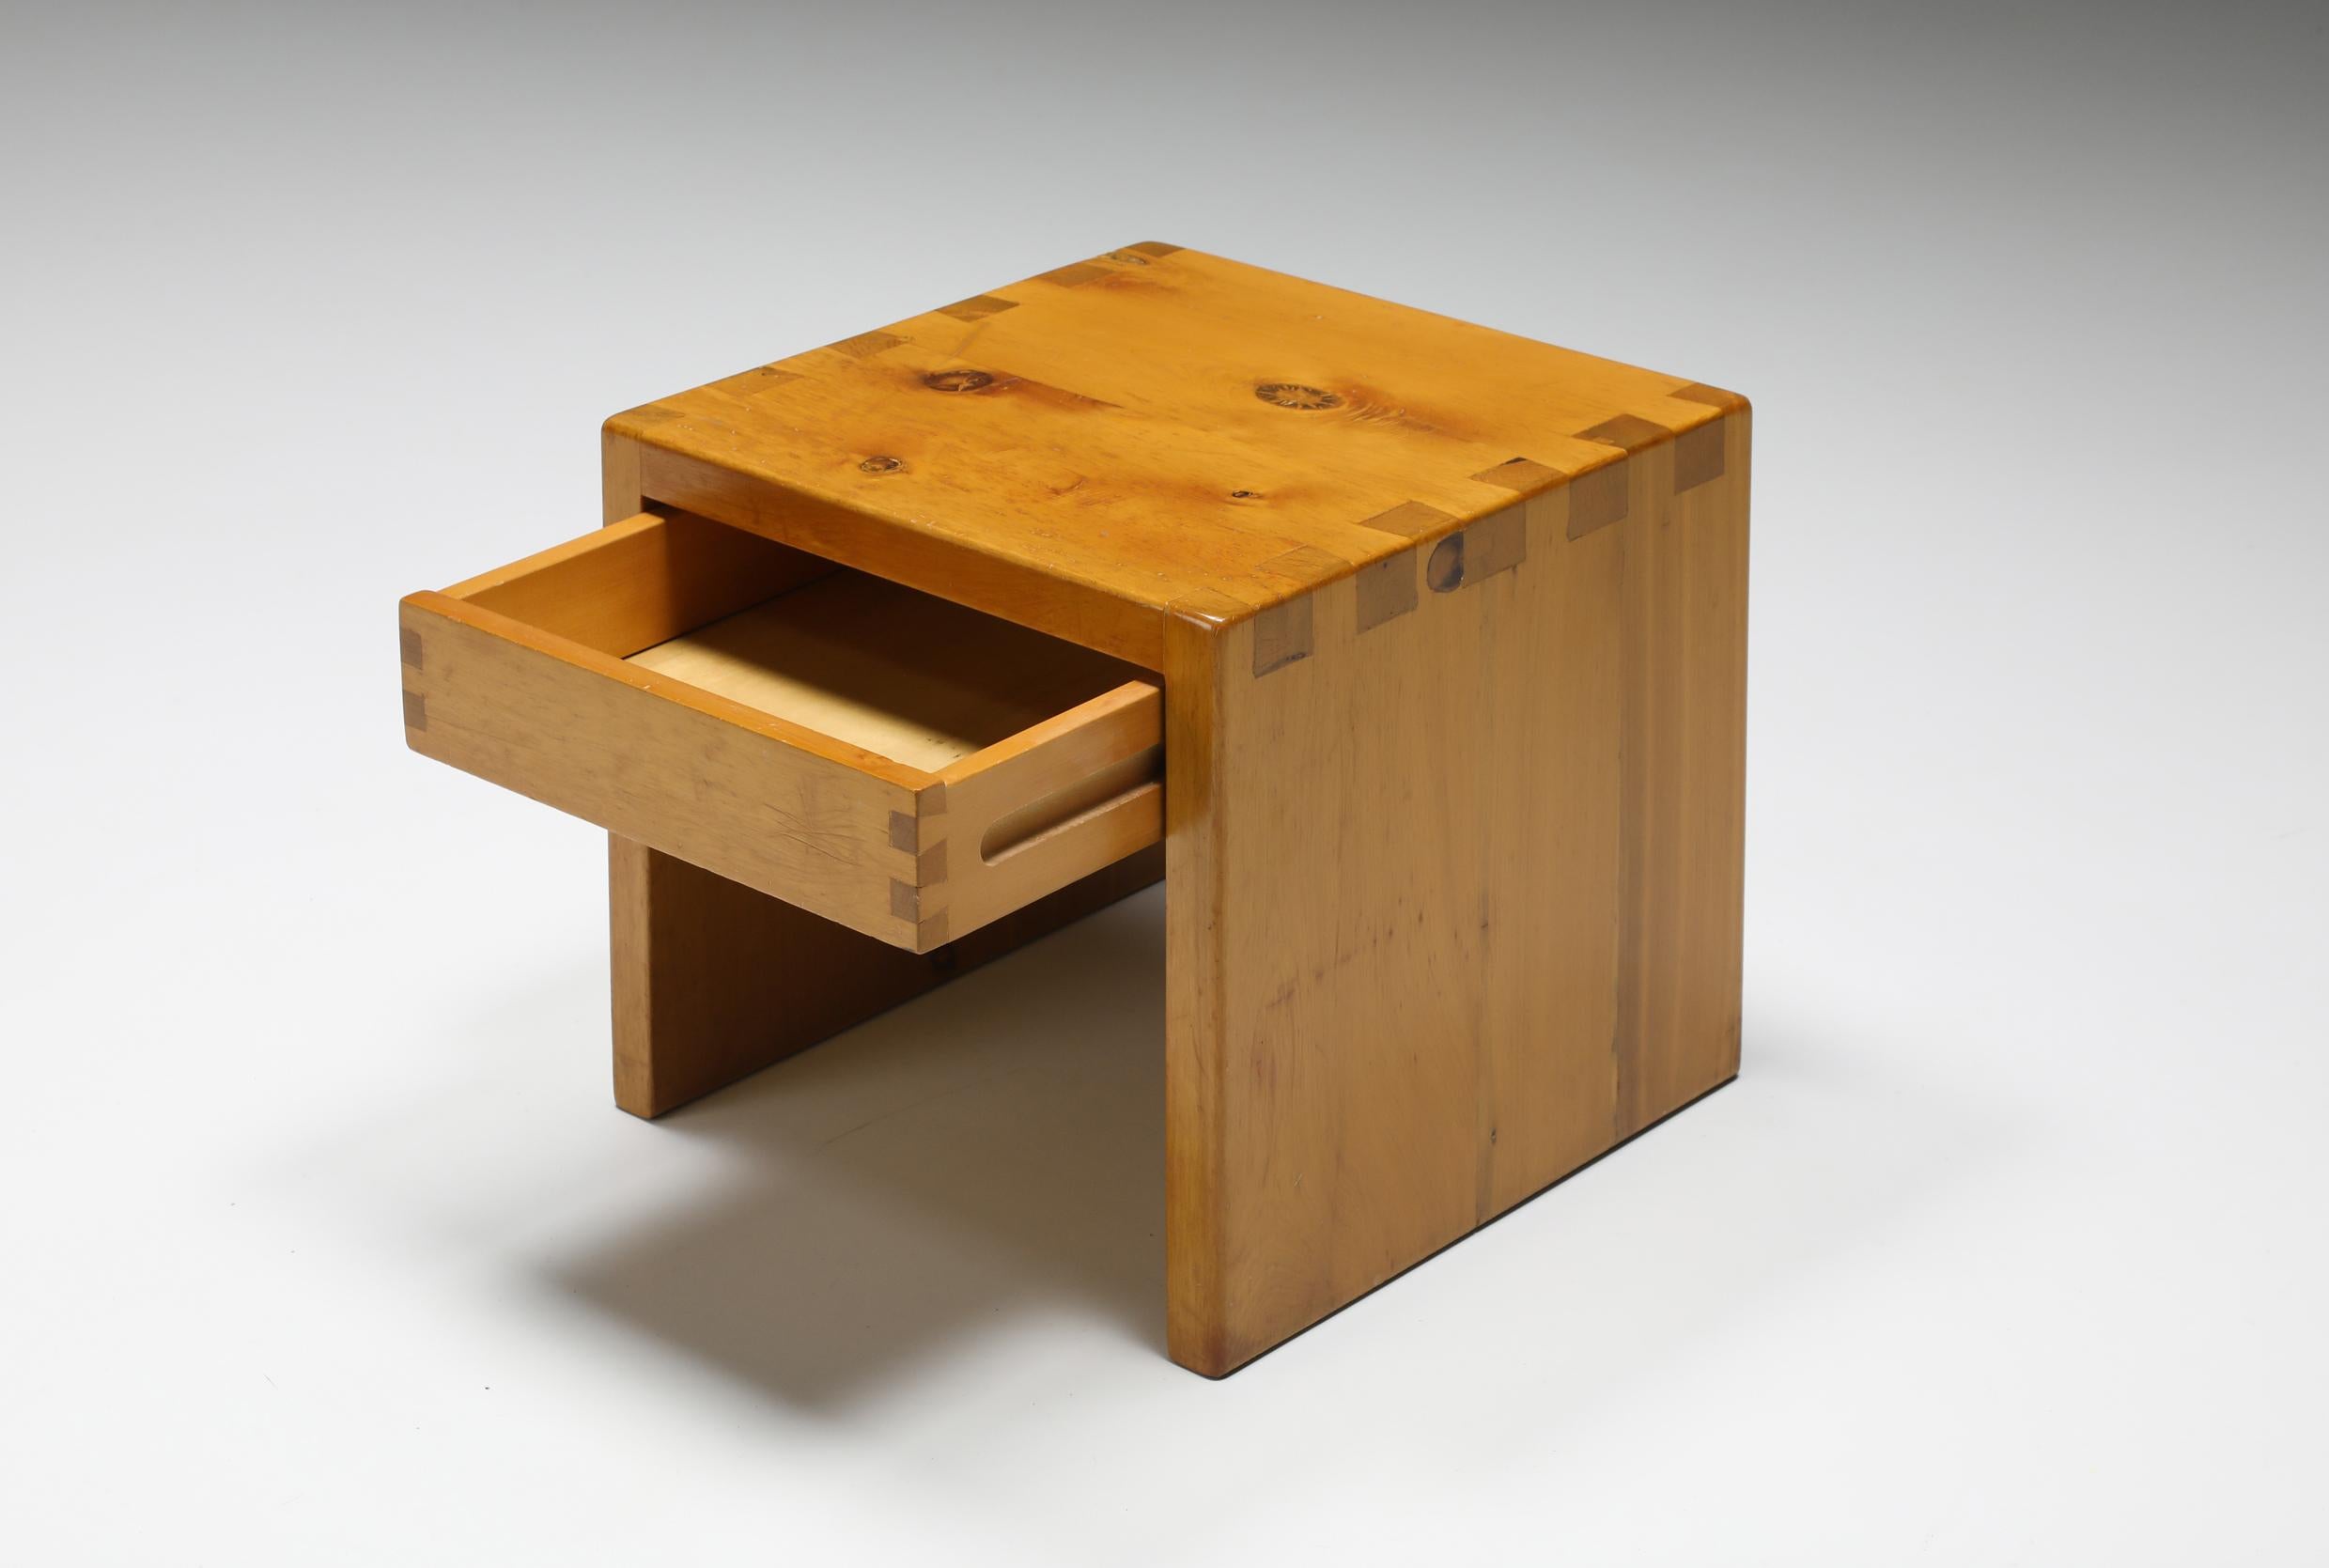 Pierre Chapo; 1960's; French Furniture design; Paris; Pinewood; le Corbusier; Jean Prouve; Eileen Gray; Collectible design; Modernism; Eclectic; Axel Vervoordt; Vincent Van Duysen; Japanese Joinery; Oriental; 

Pierre Chapo inspired side table